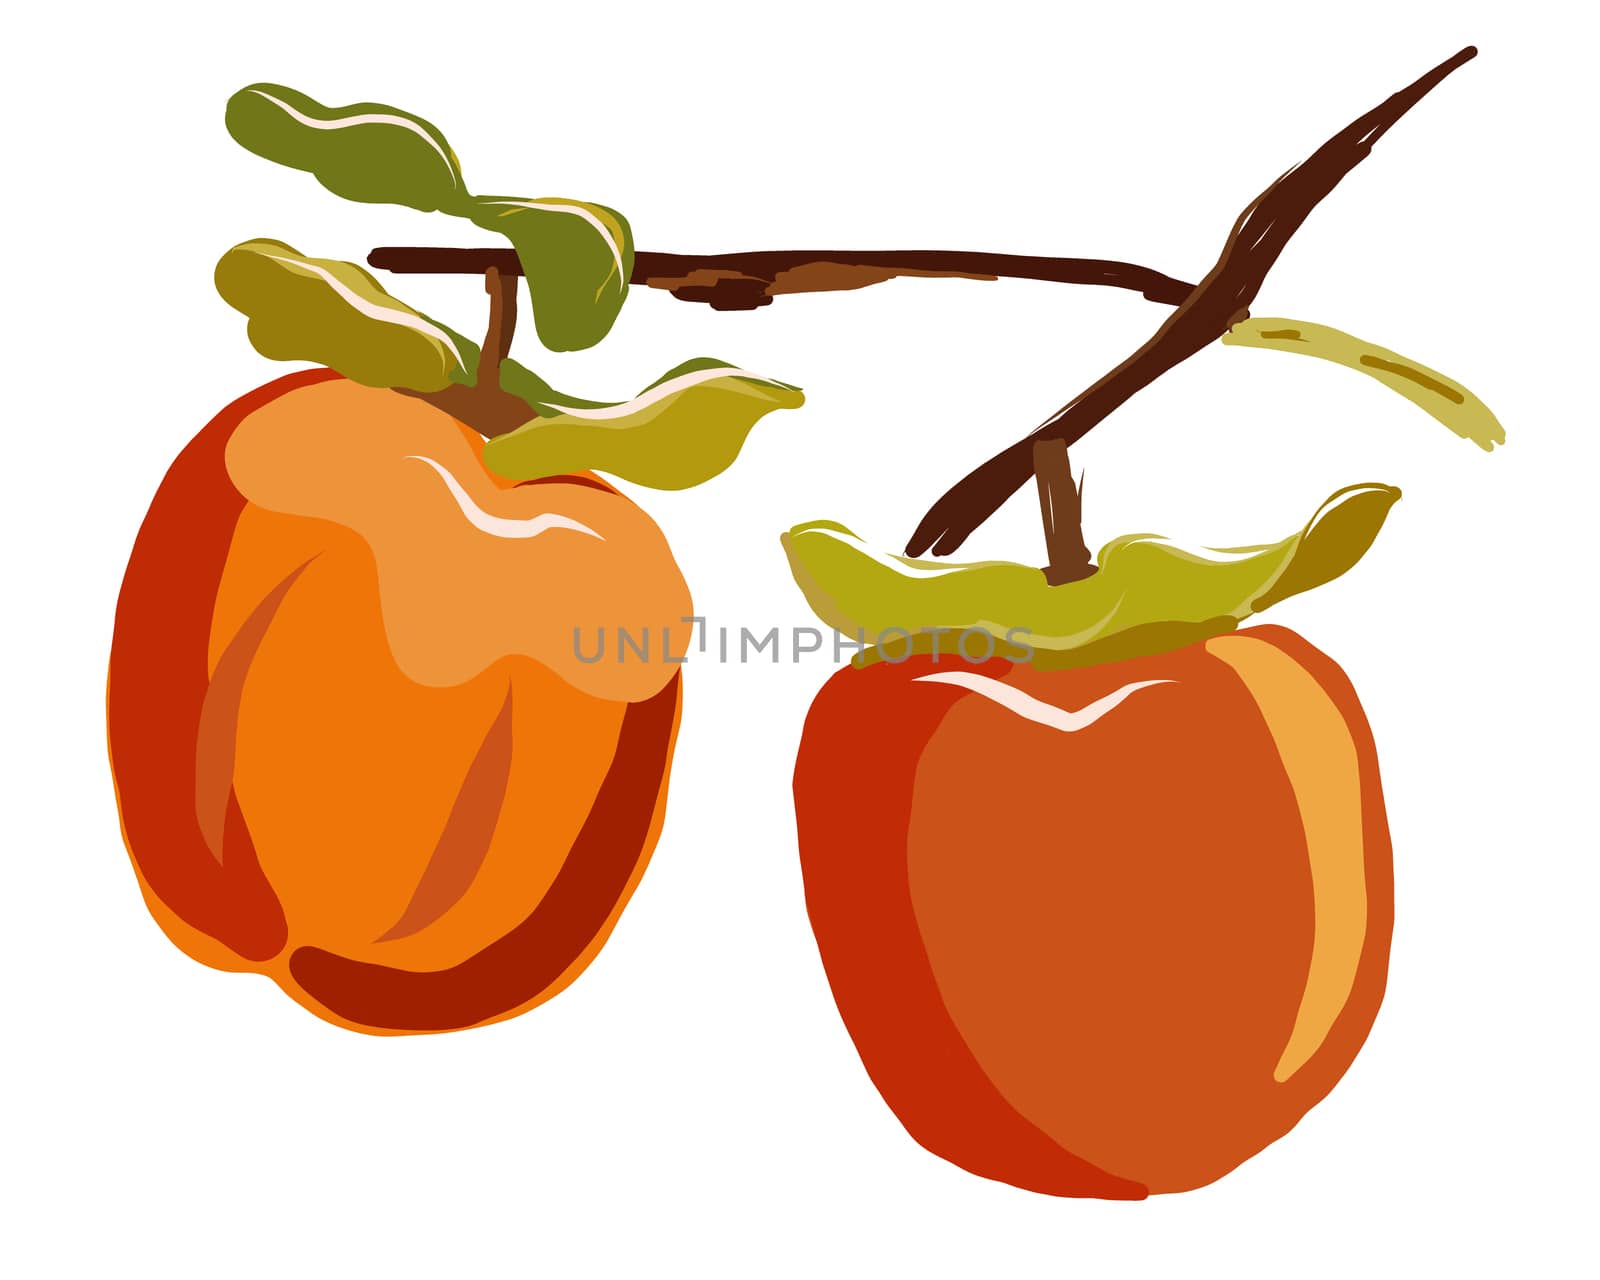 Sharon fruit branch with leaves isolated on white background vector illustration. by Nata_Prando